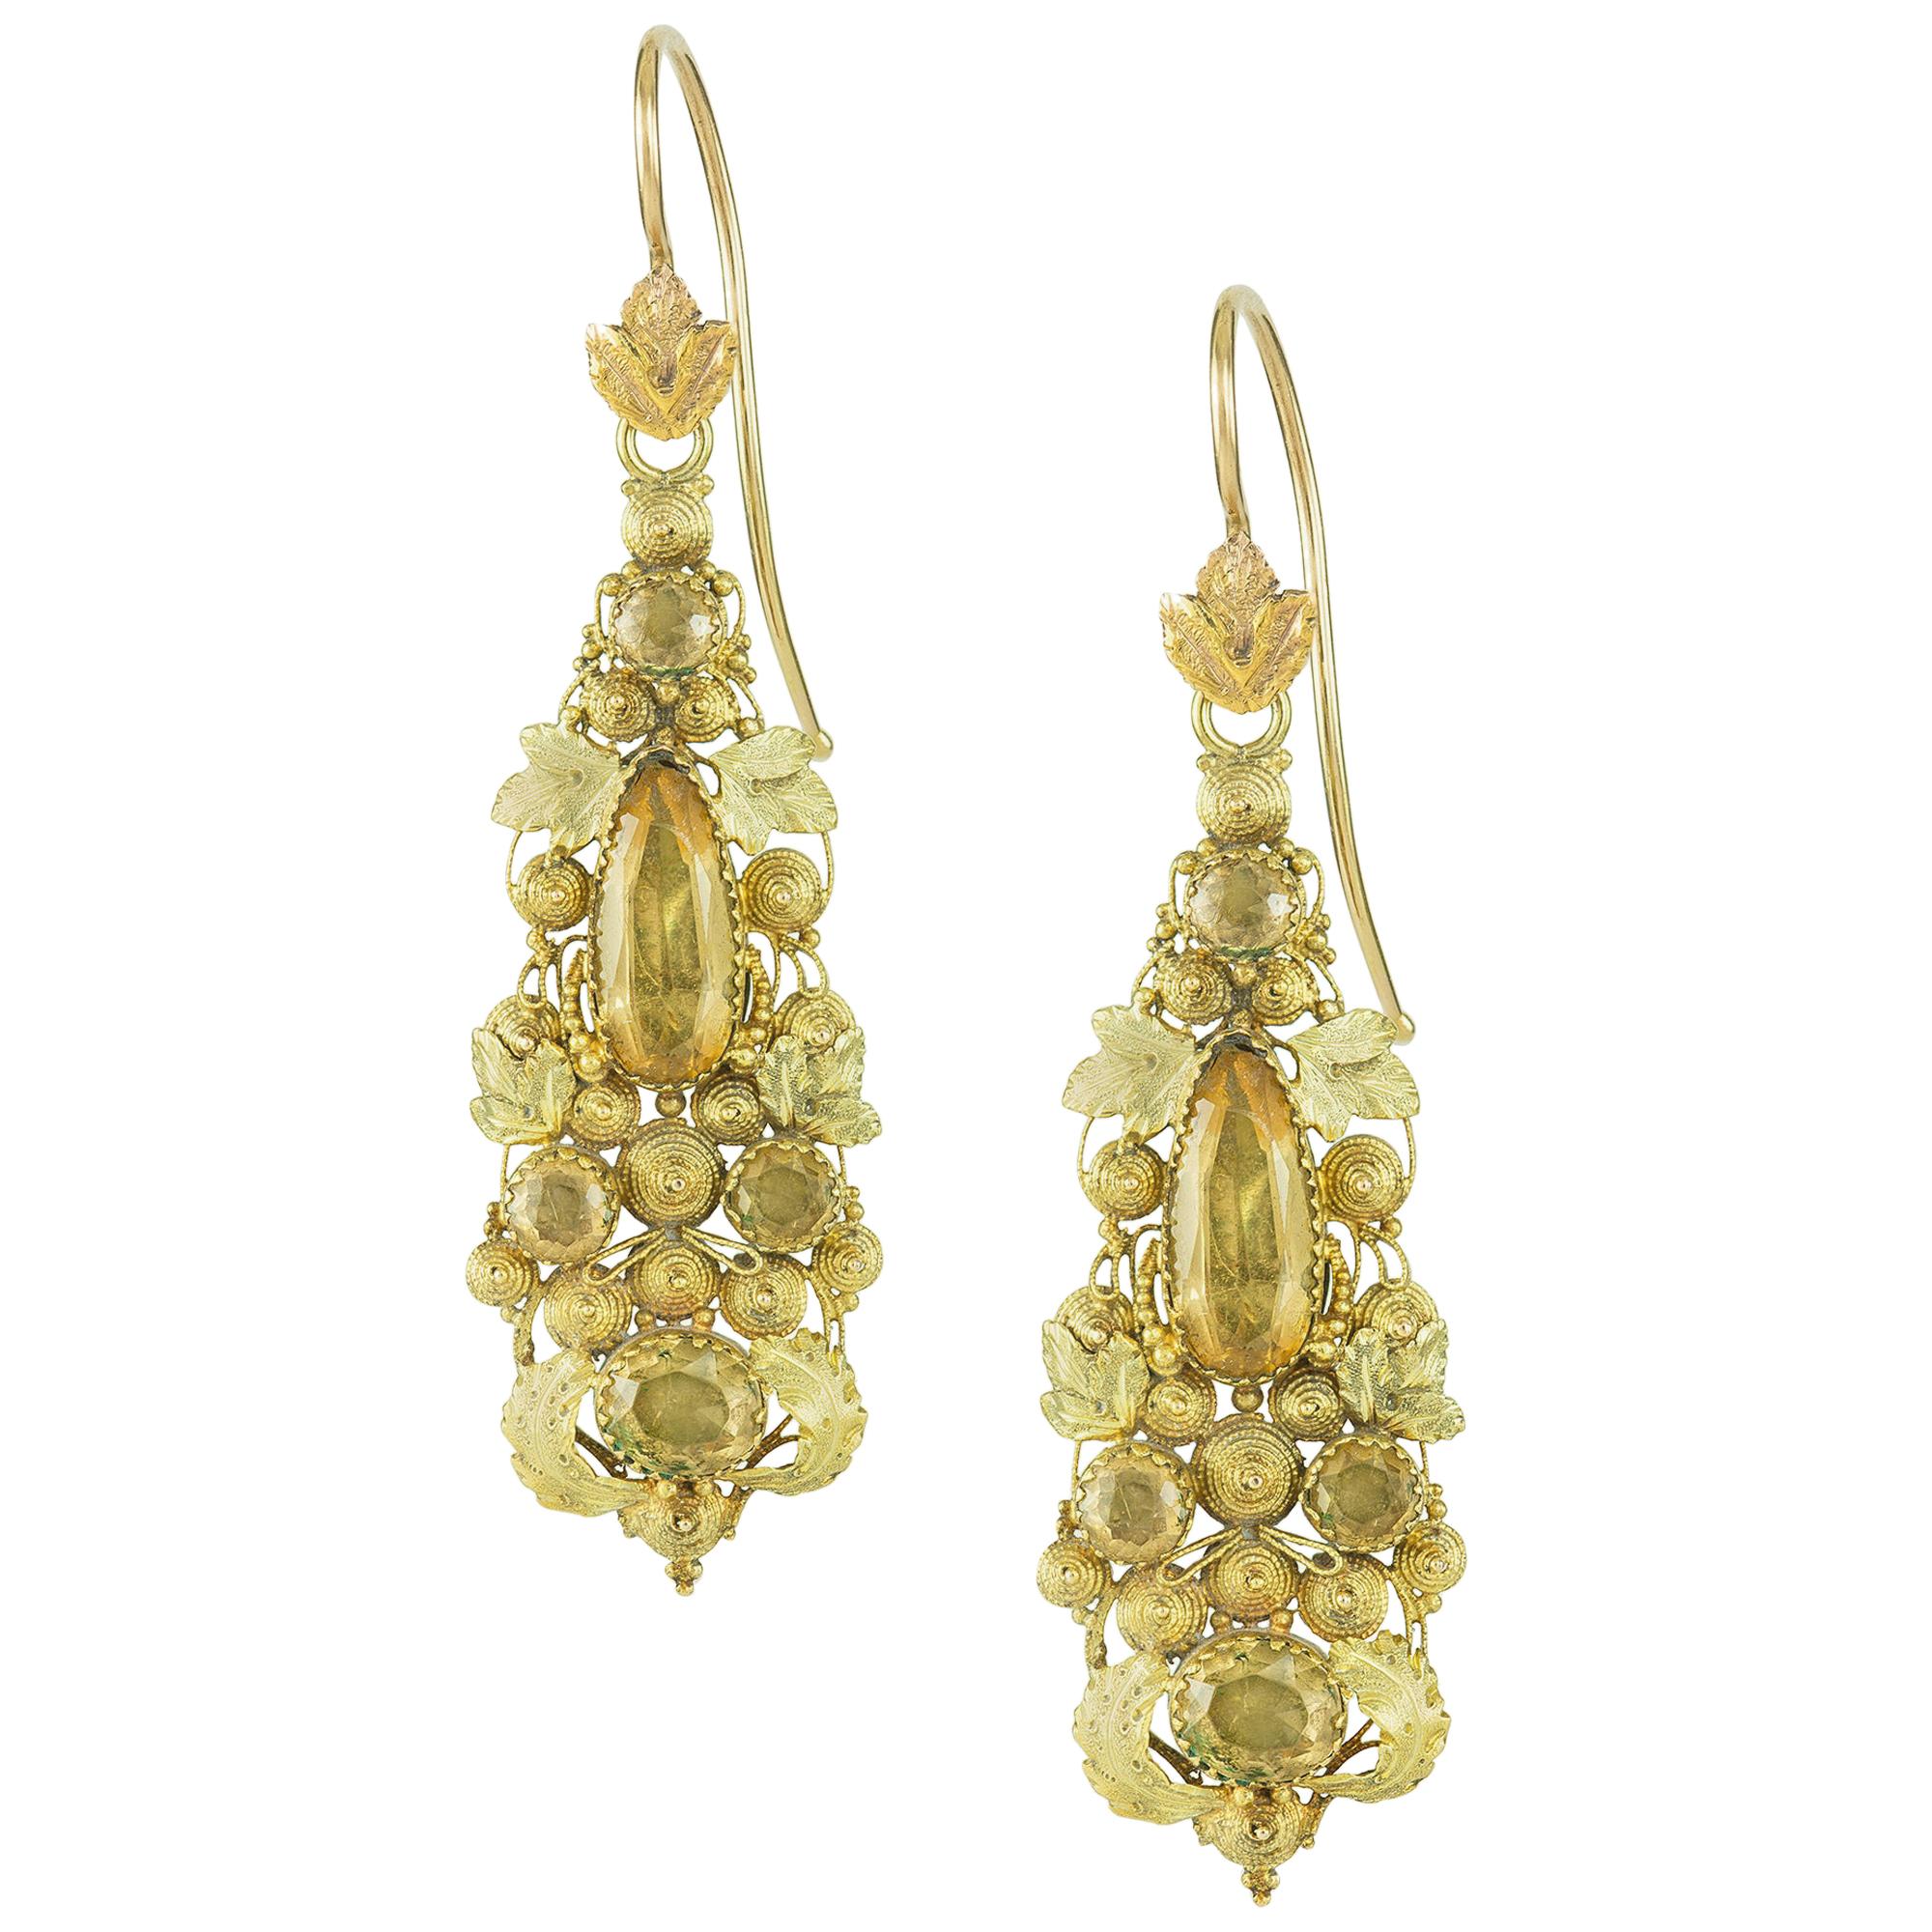 Pair of Regency Yellow Gold and Topaz Cannetille Earrings